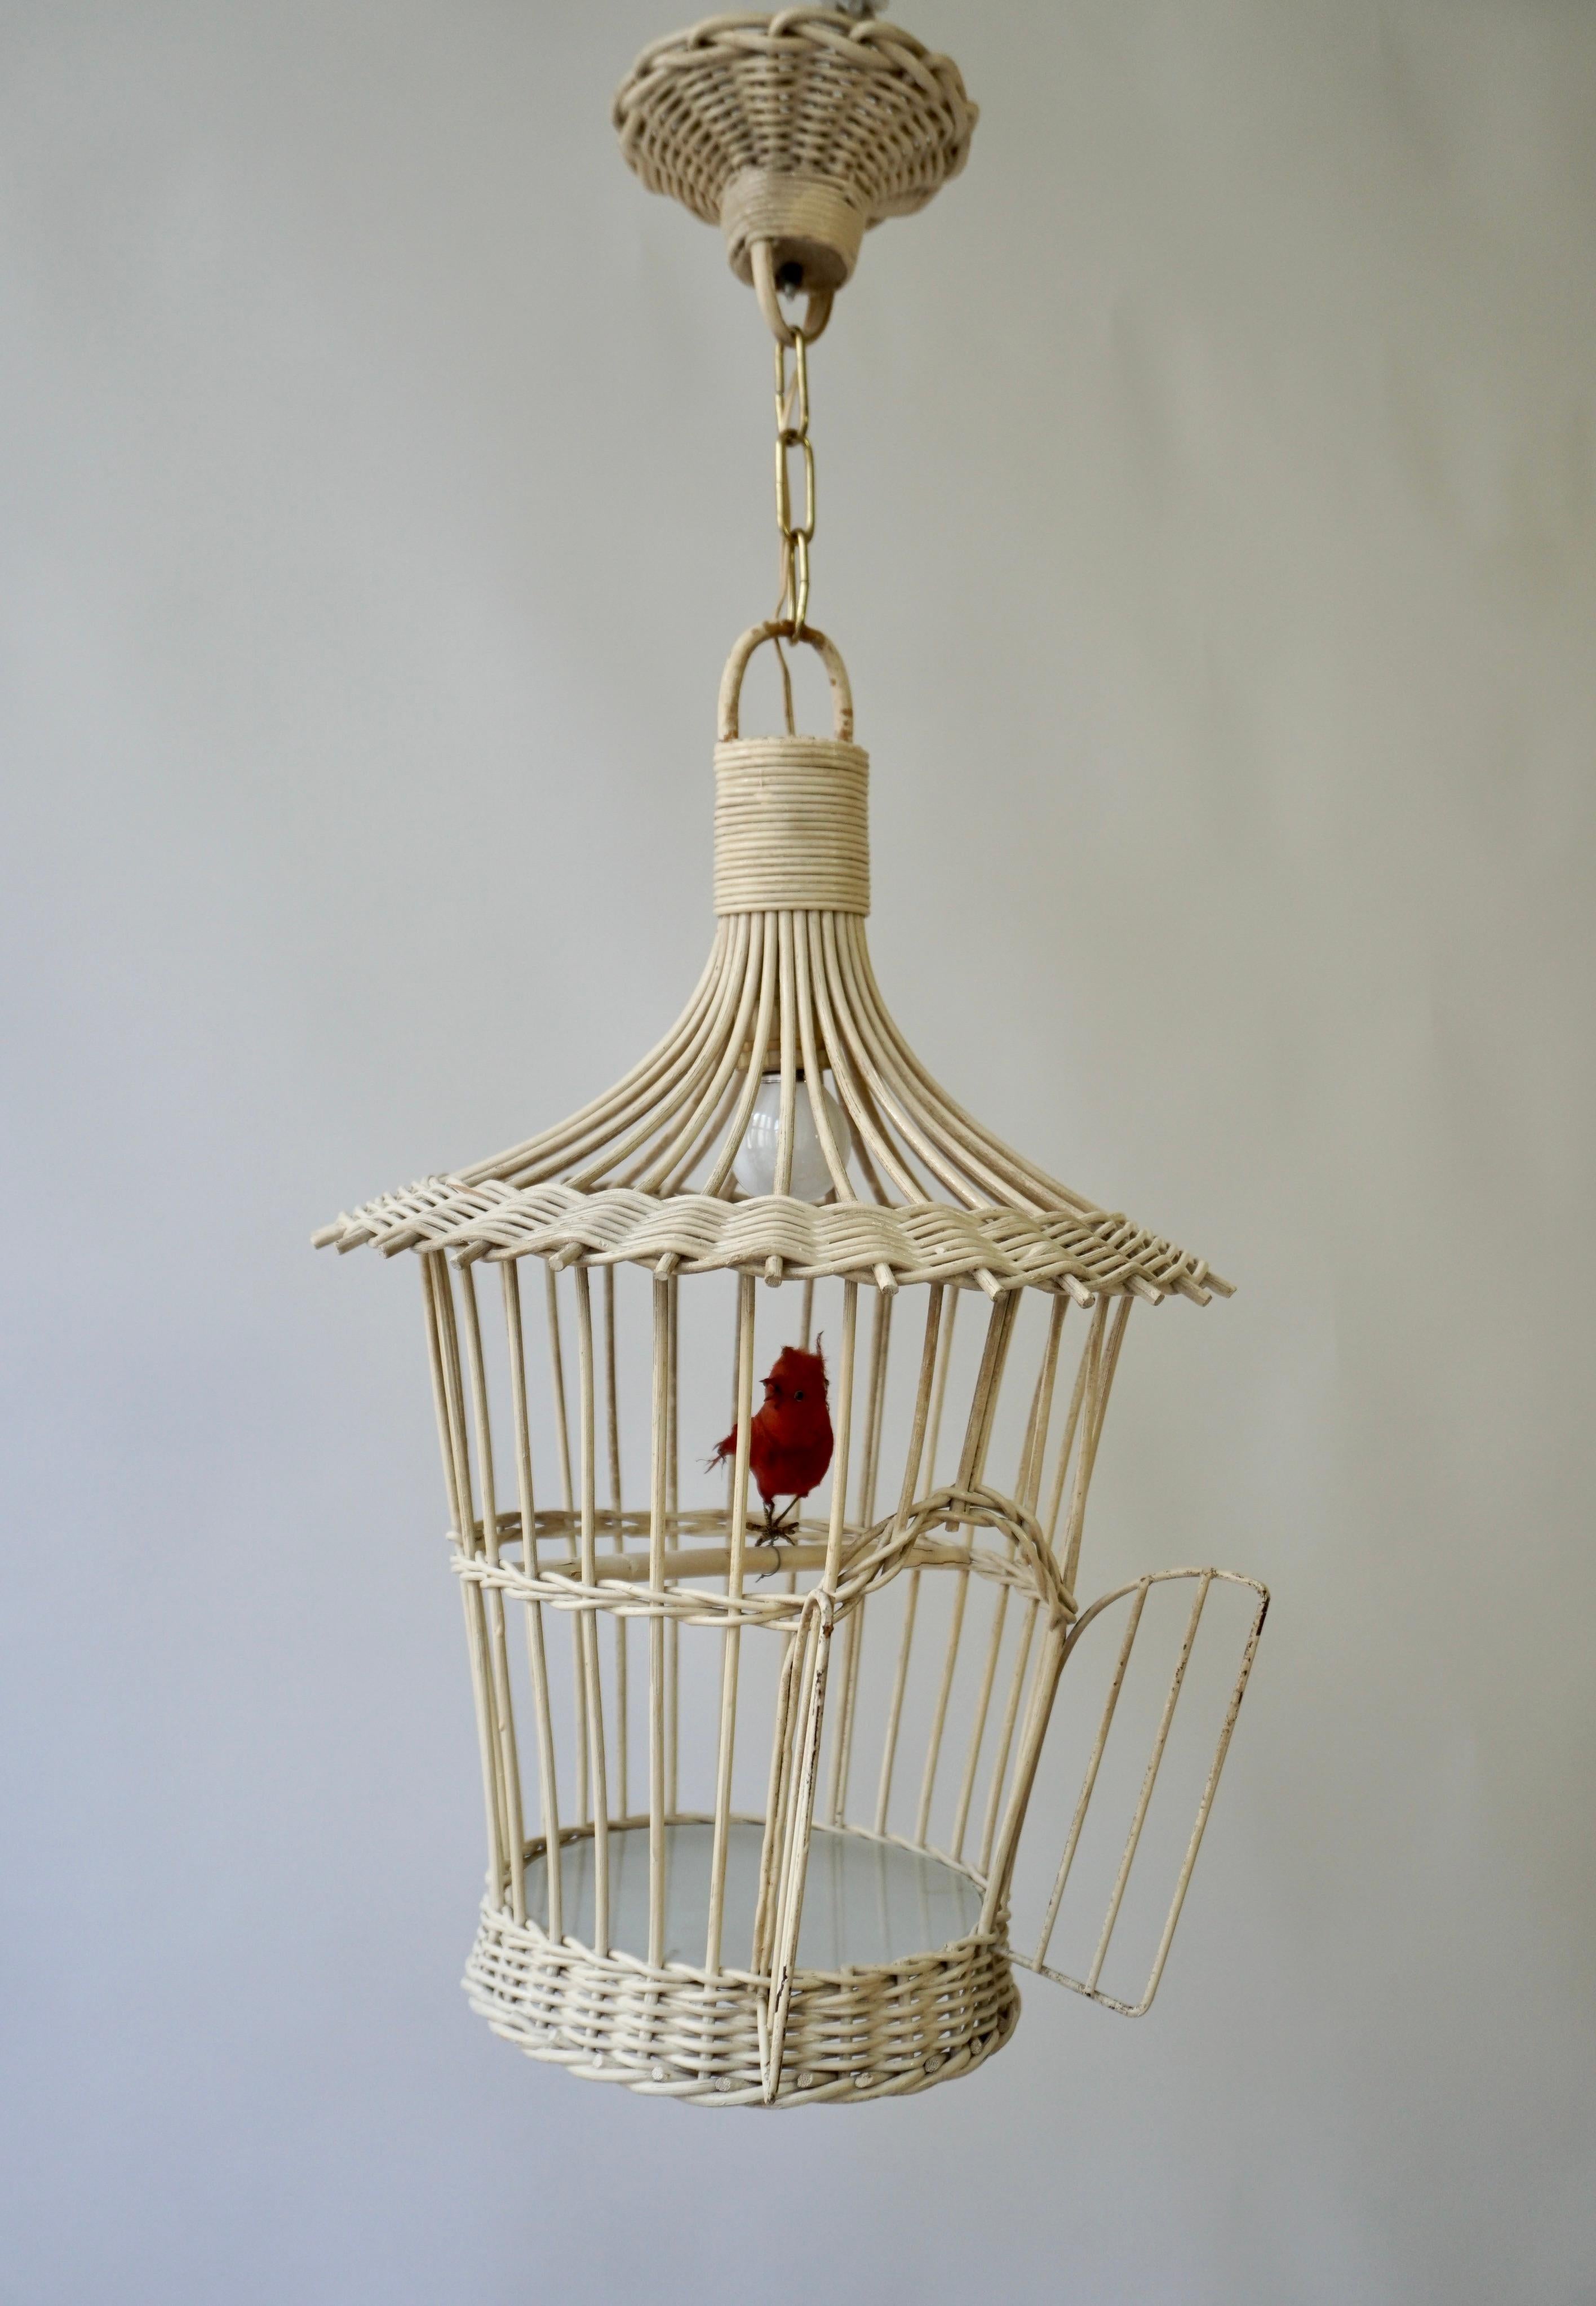 A real old birdcage hanging lamp in rattan with bird and a round glass bottom.

The height including the chain and the ceiling plate is 27.5